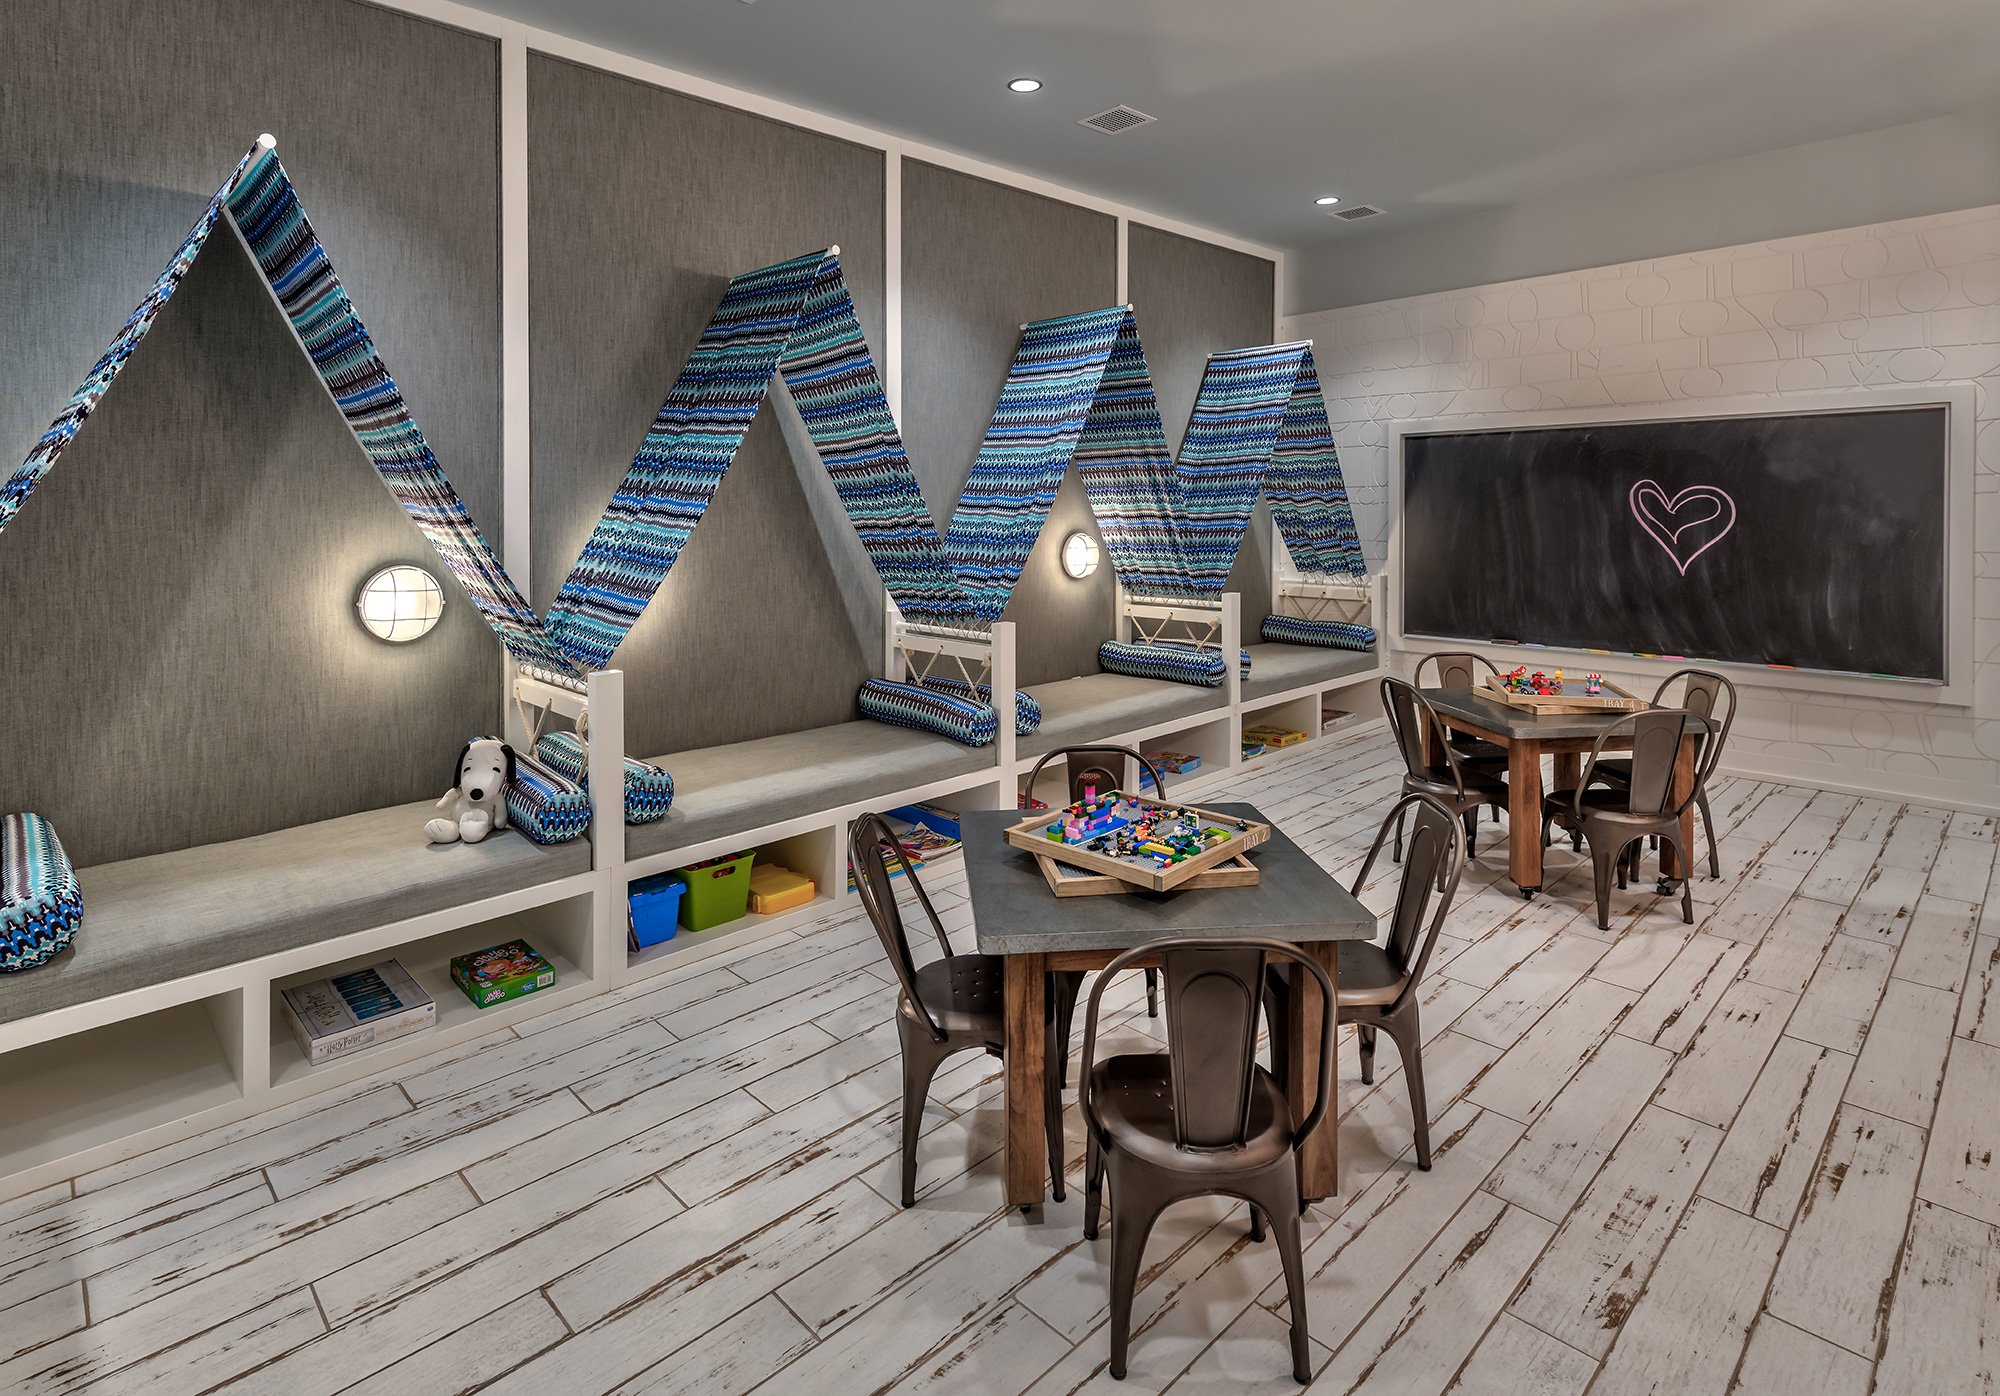   A lively playroom at Tahoe Beach Club is equipped with toys, games, and cheerful decor, providing a fun and engaging space for children.